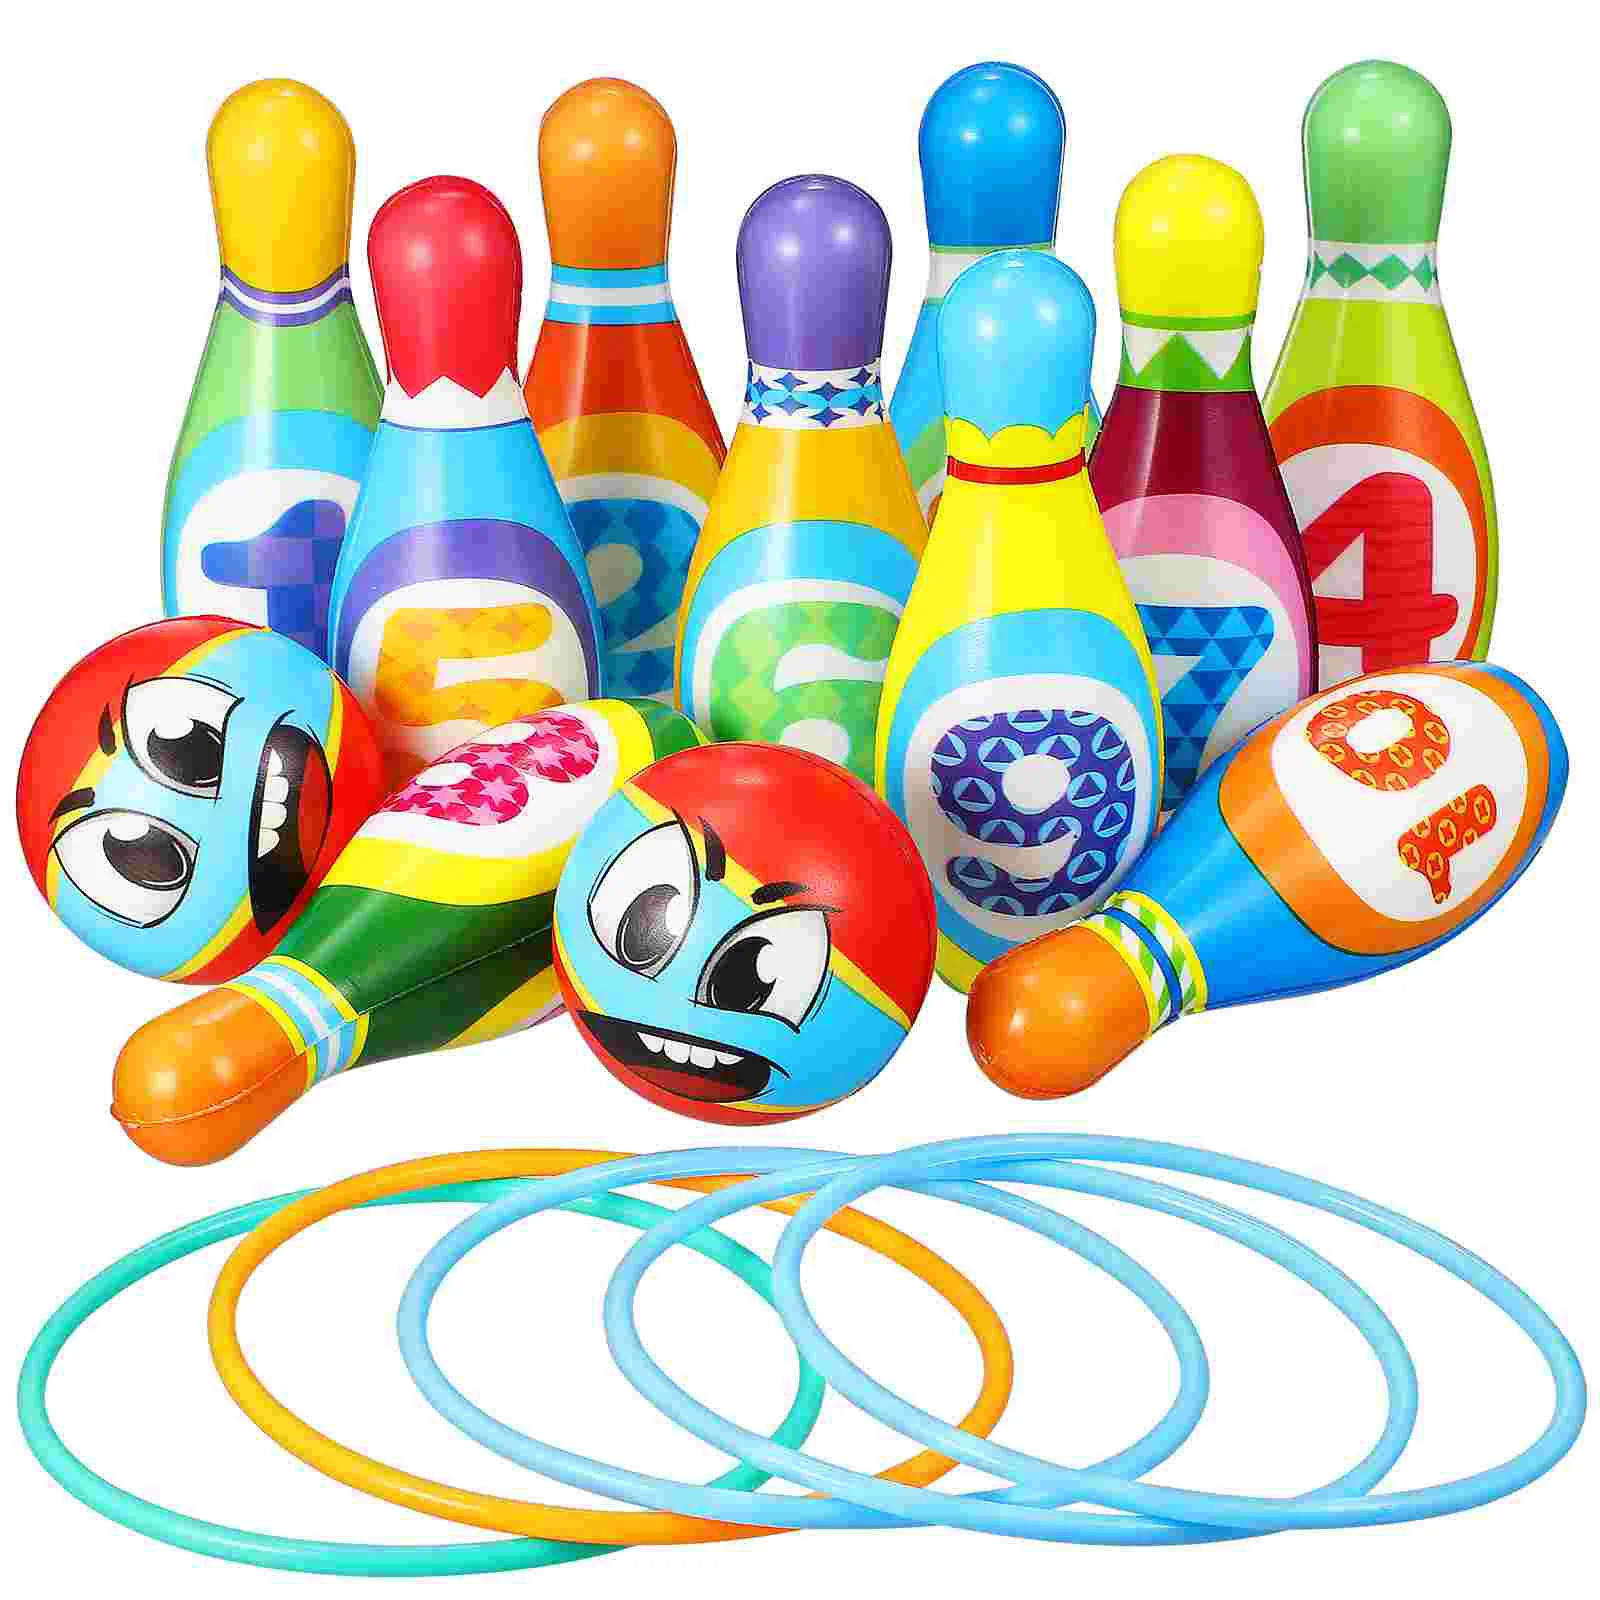 

Kids Bowling Toys Sets Bowling Pins And Balls Fun Safe PU Educational Games For Toddlers Children Outdoor Indoor Sports